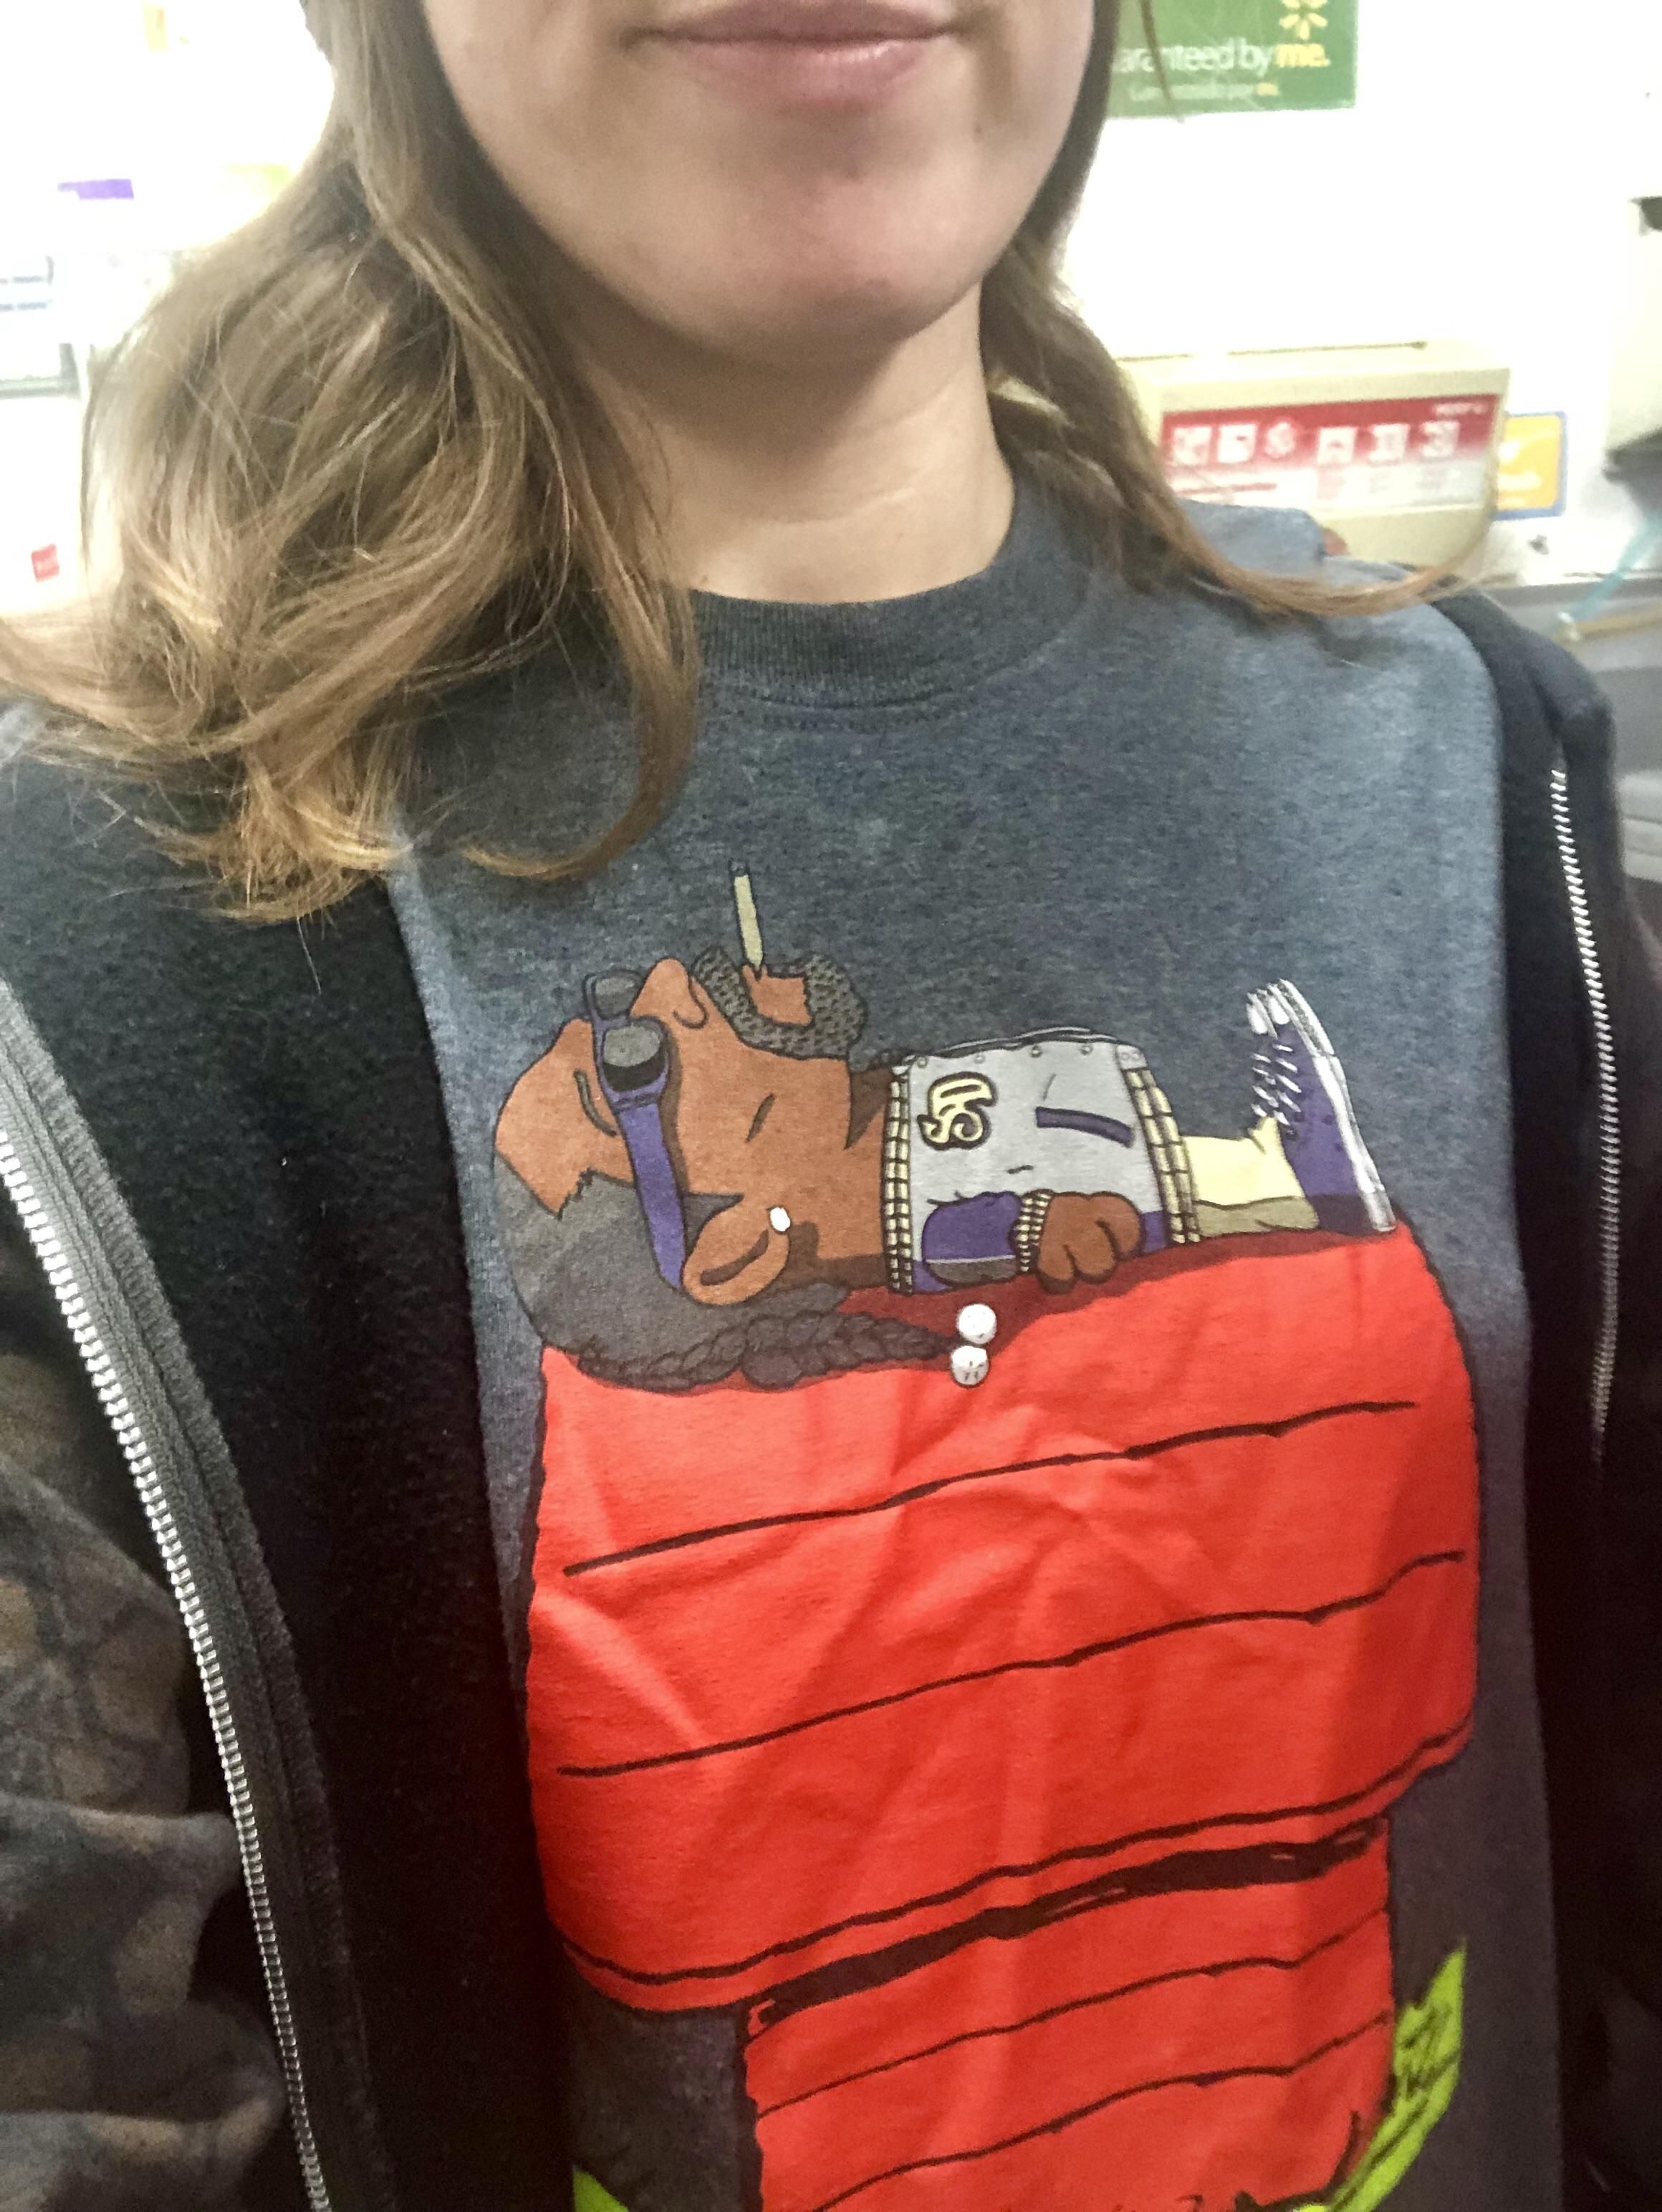 My shirt was a hit at work today, part 2